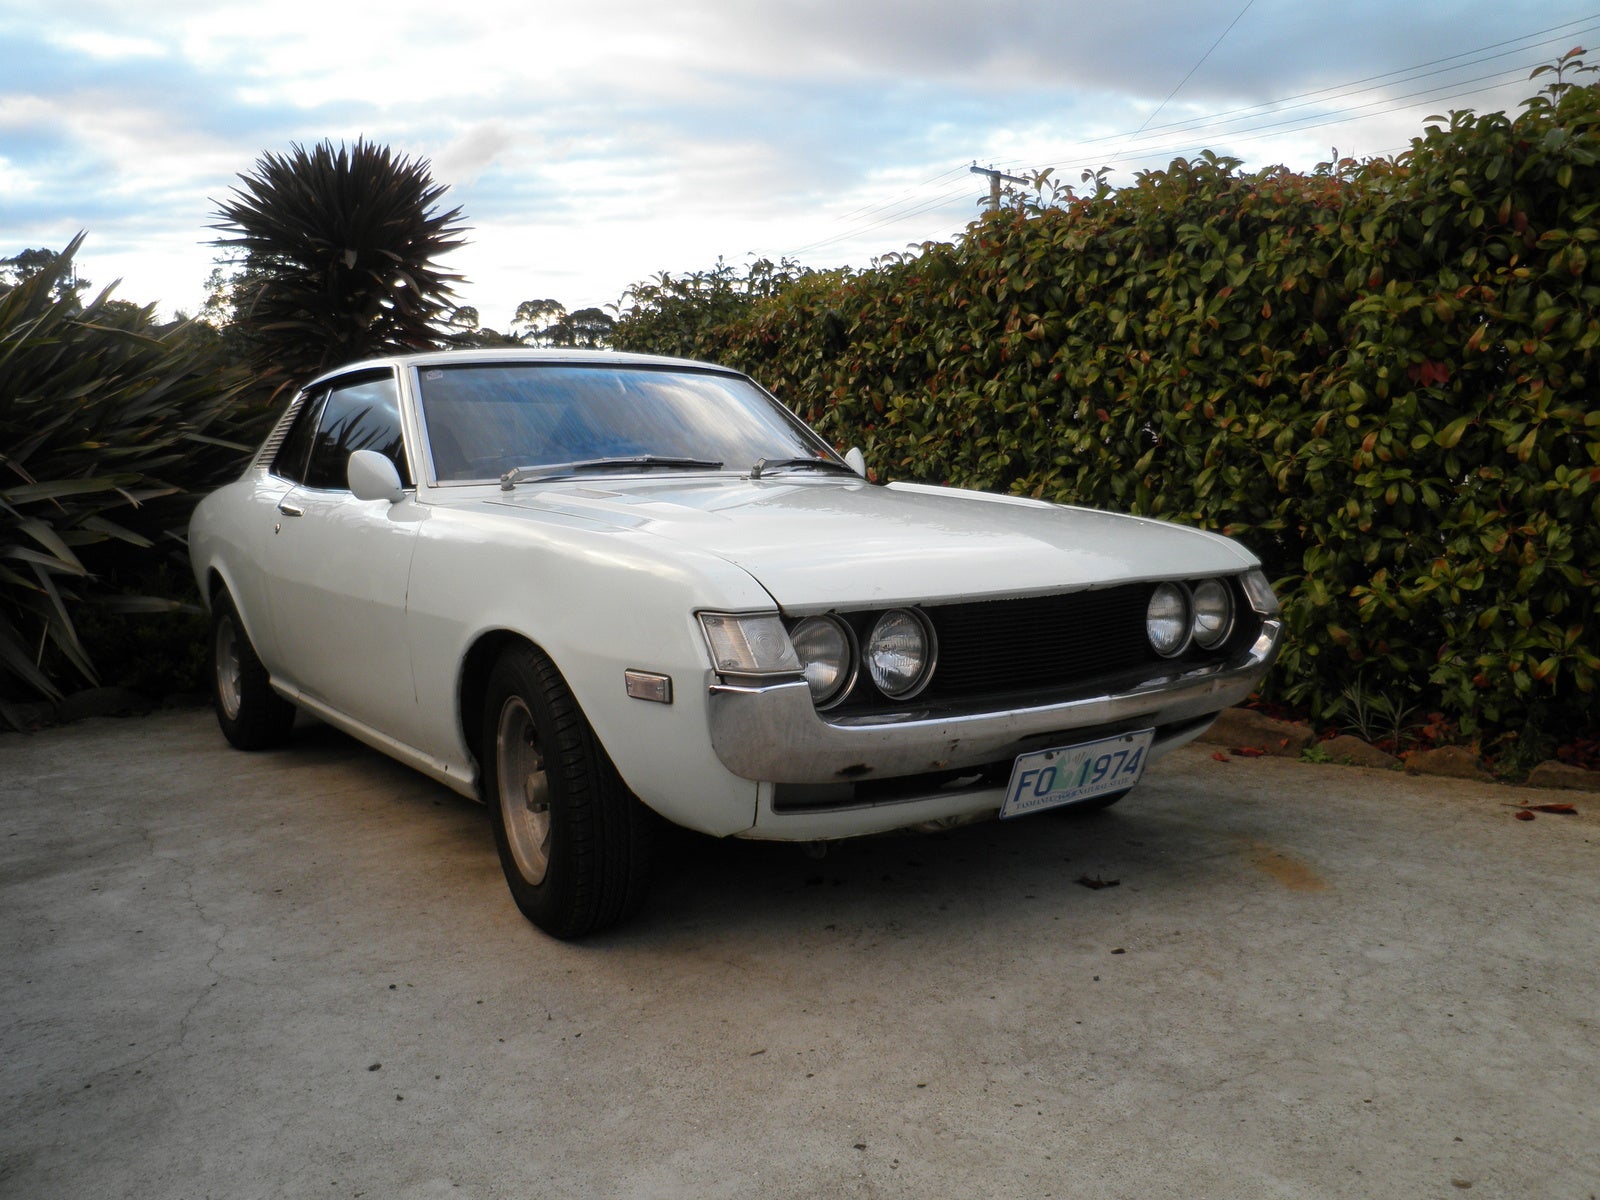 Used 1972 toyota celica for sale